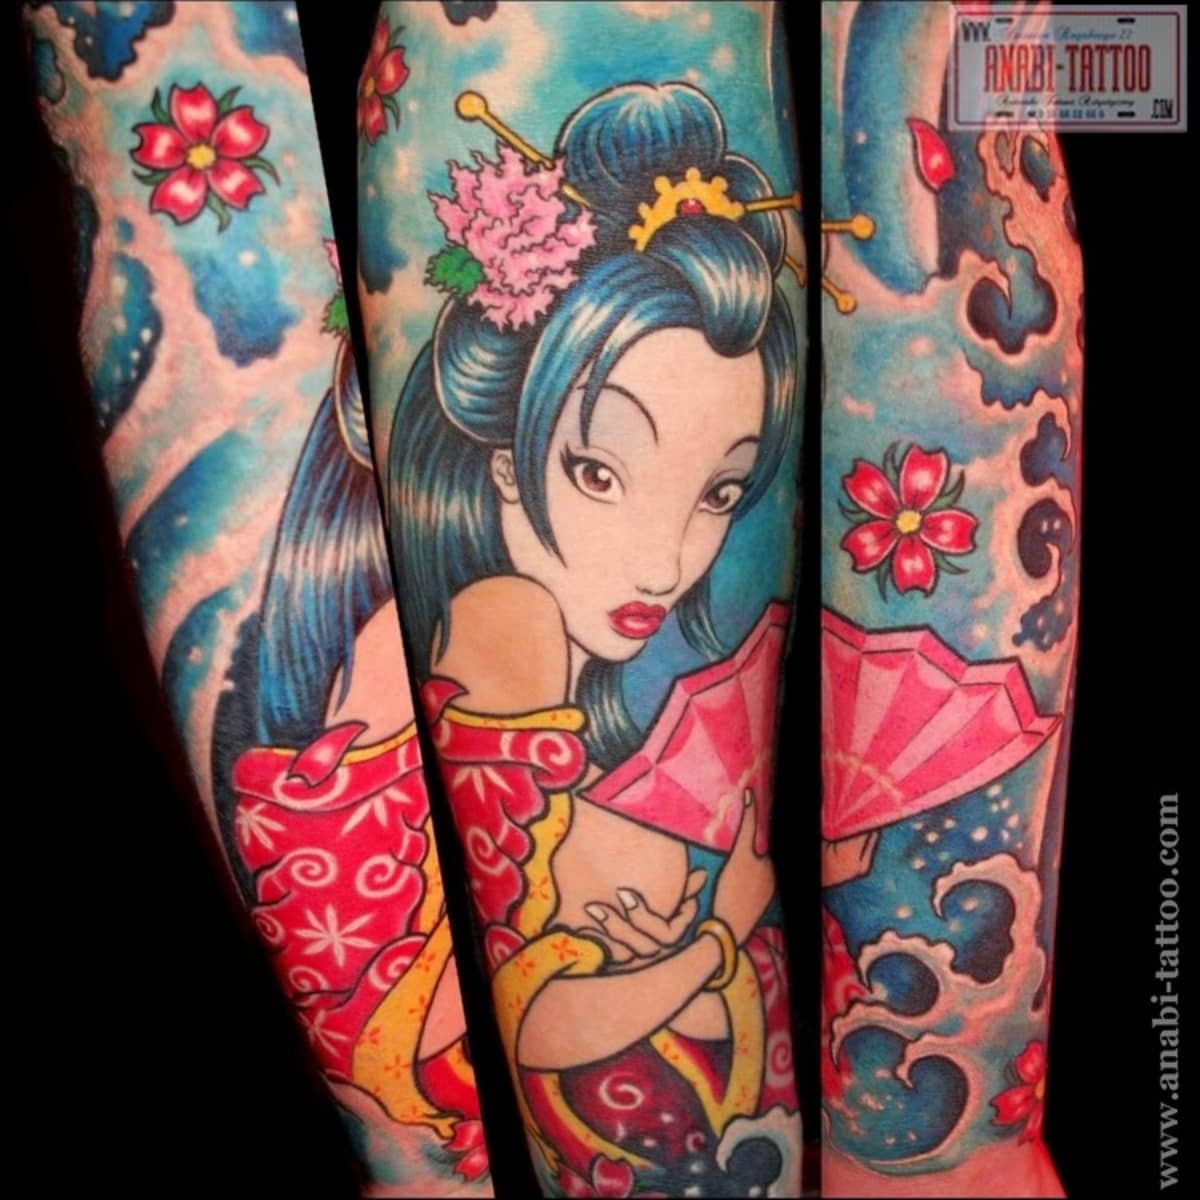 Lexica - Tattoo design, stencil, stencil on paper, tattoo stencil,  traditional, beautiful portrait of a traditional japanese girl with flowers  in her...